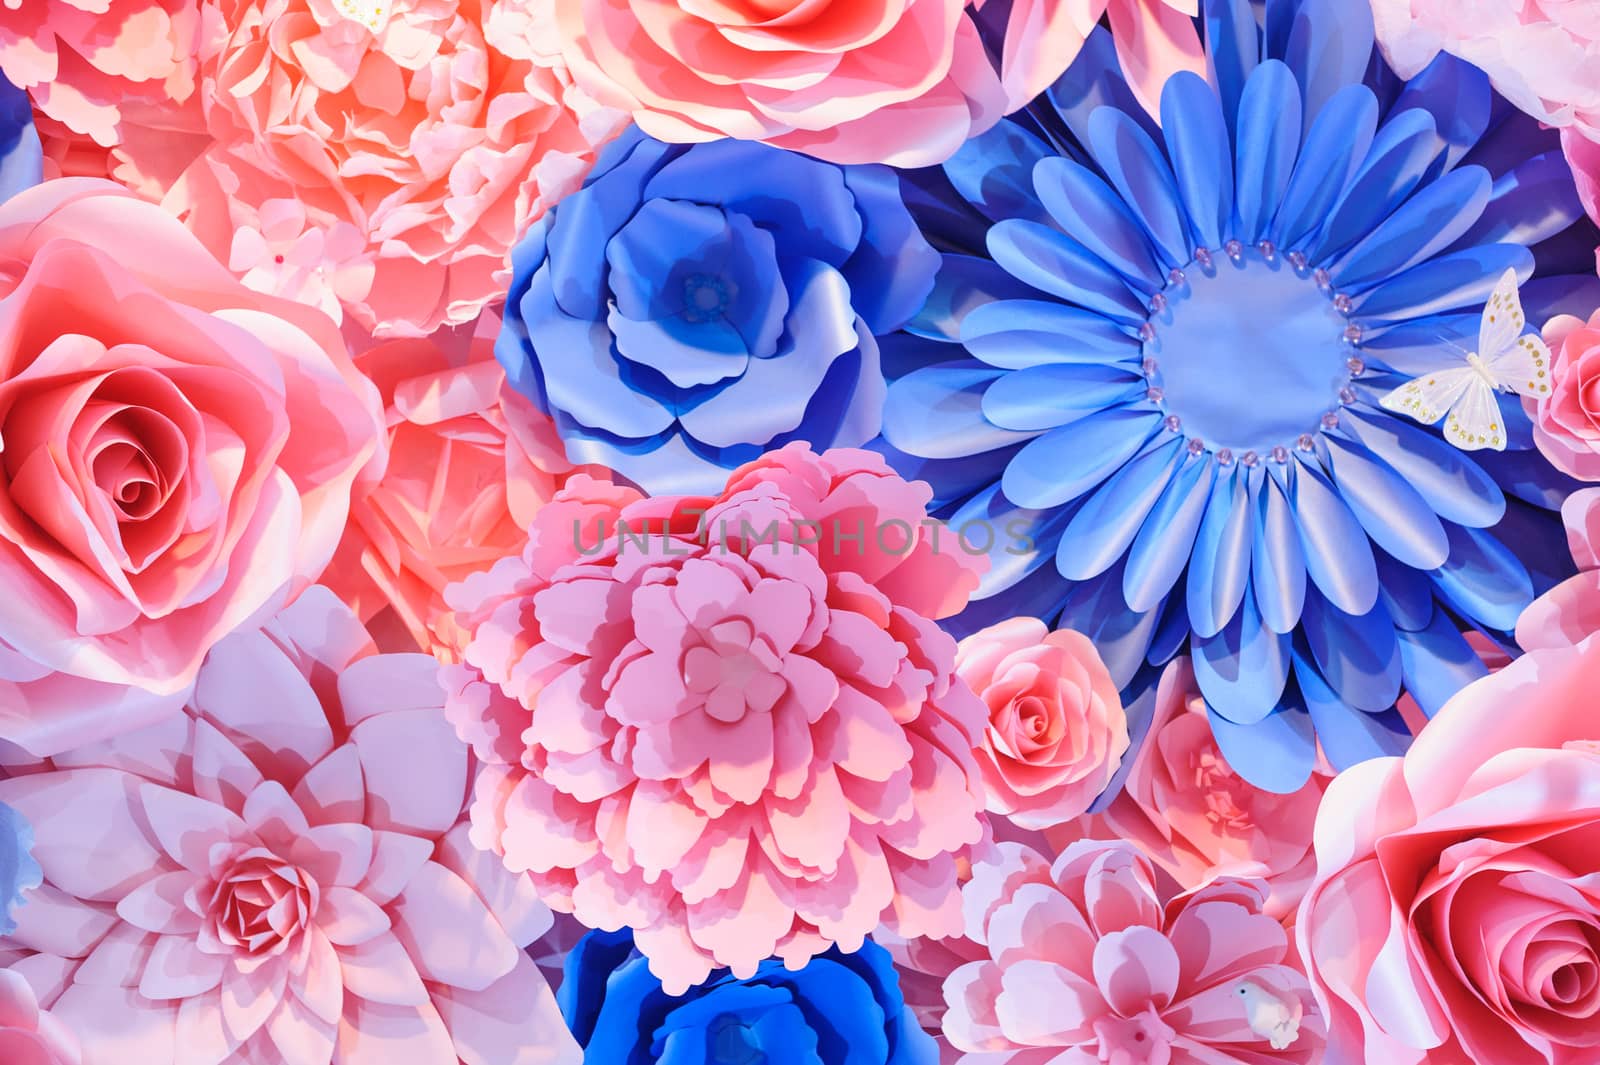 background of pink and blue colors for holiday decor by timonko